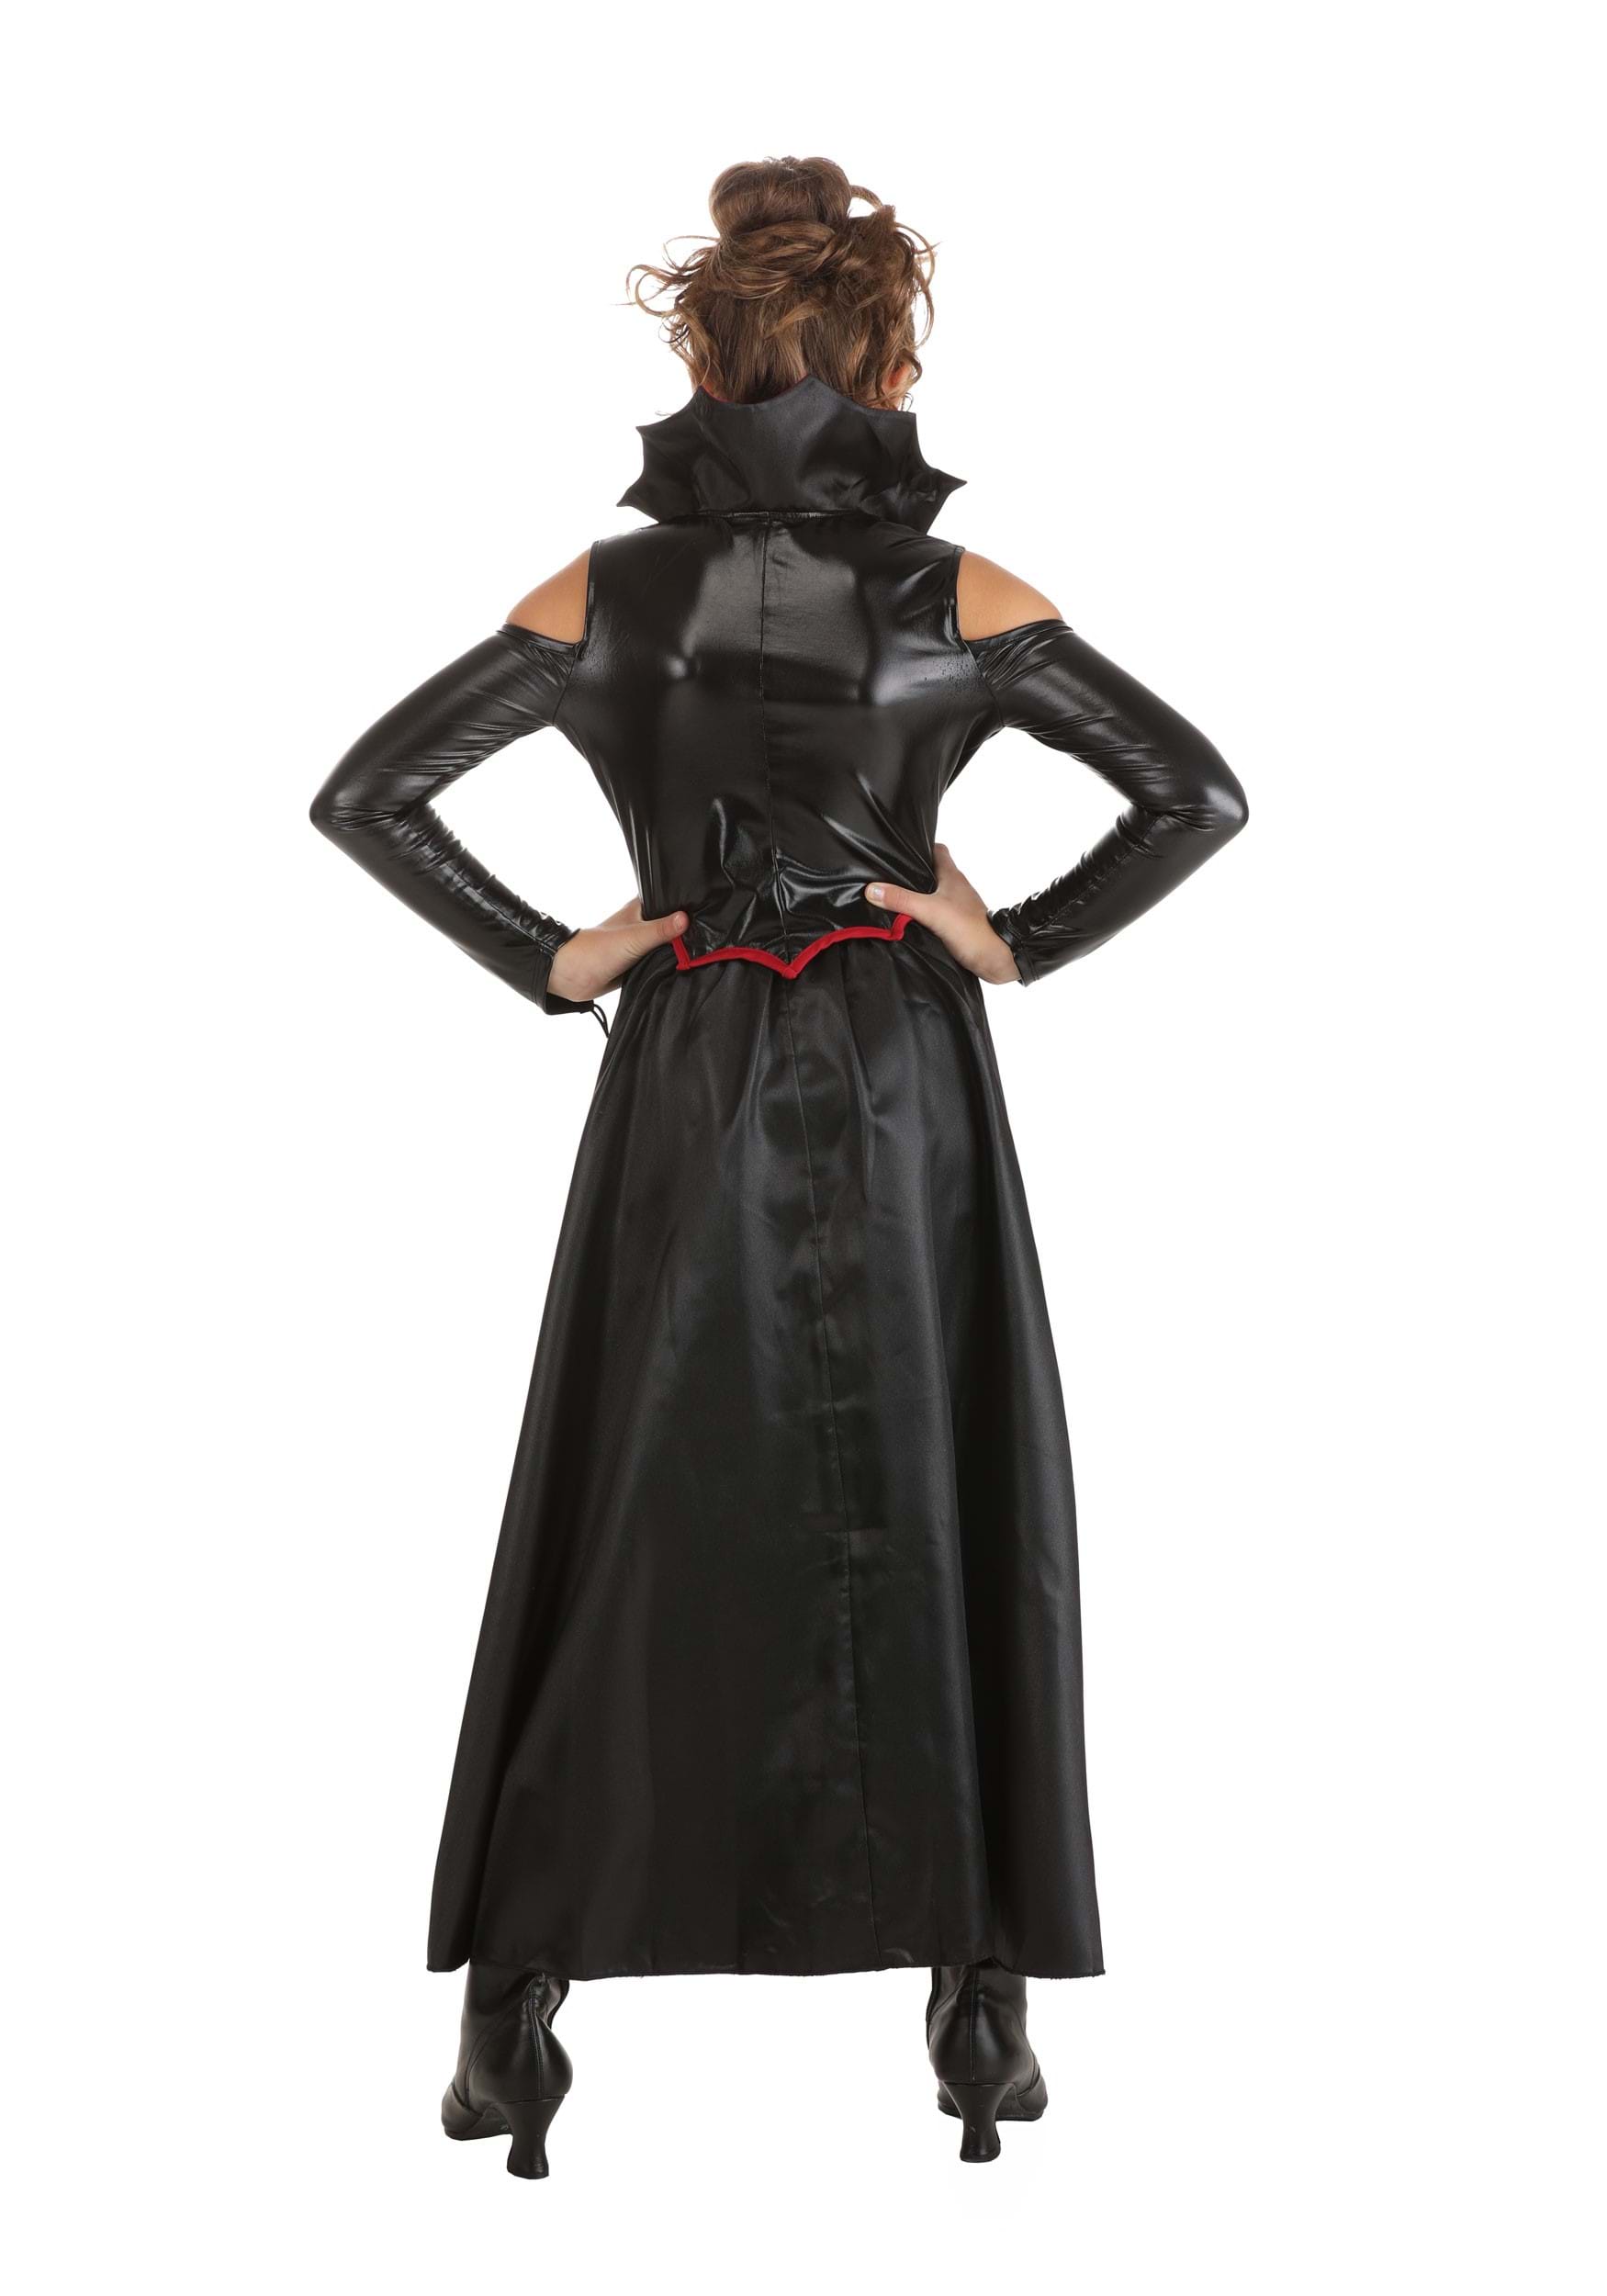 Princess Of Darkness Costume For Girls